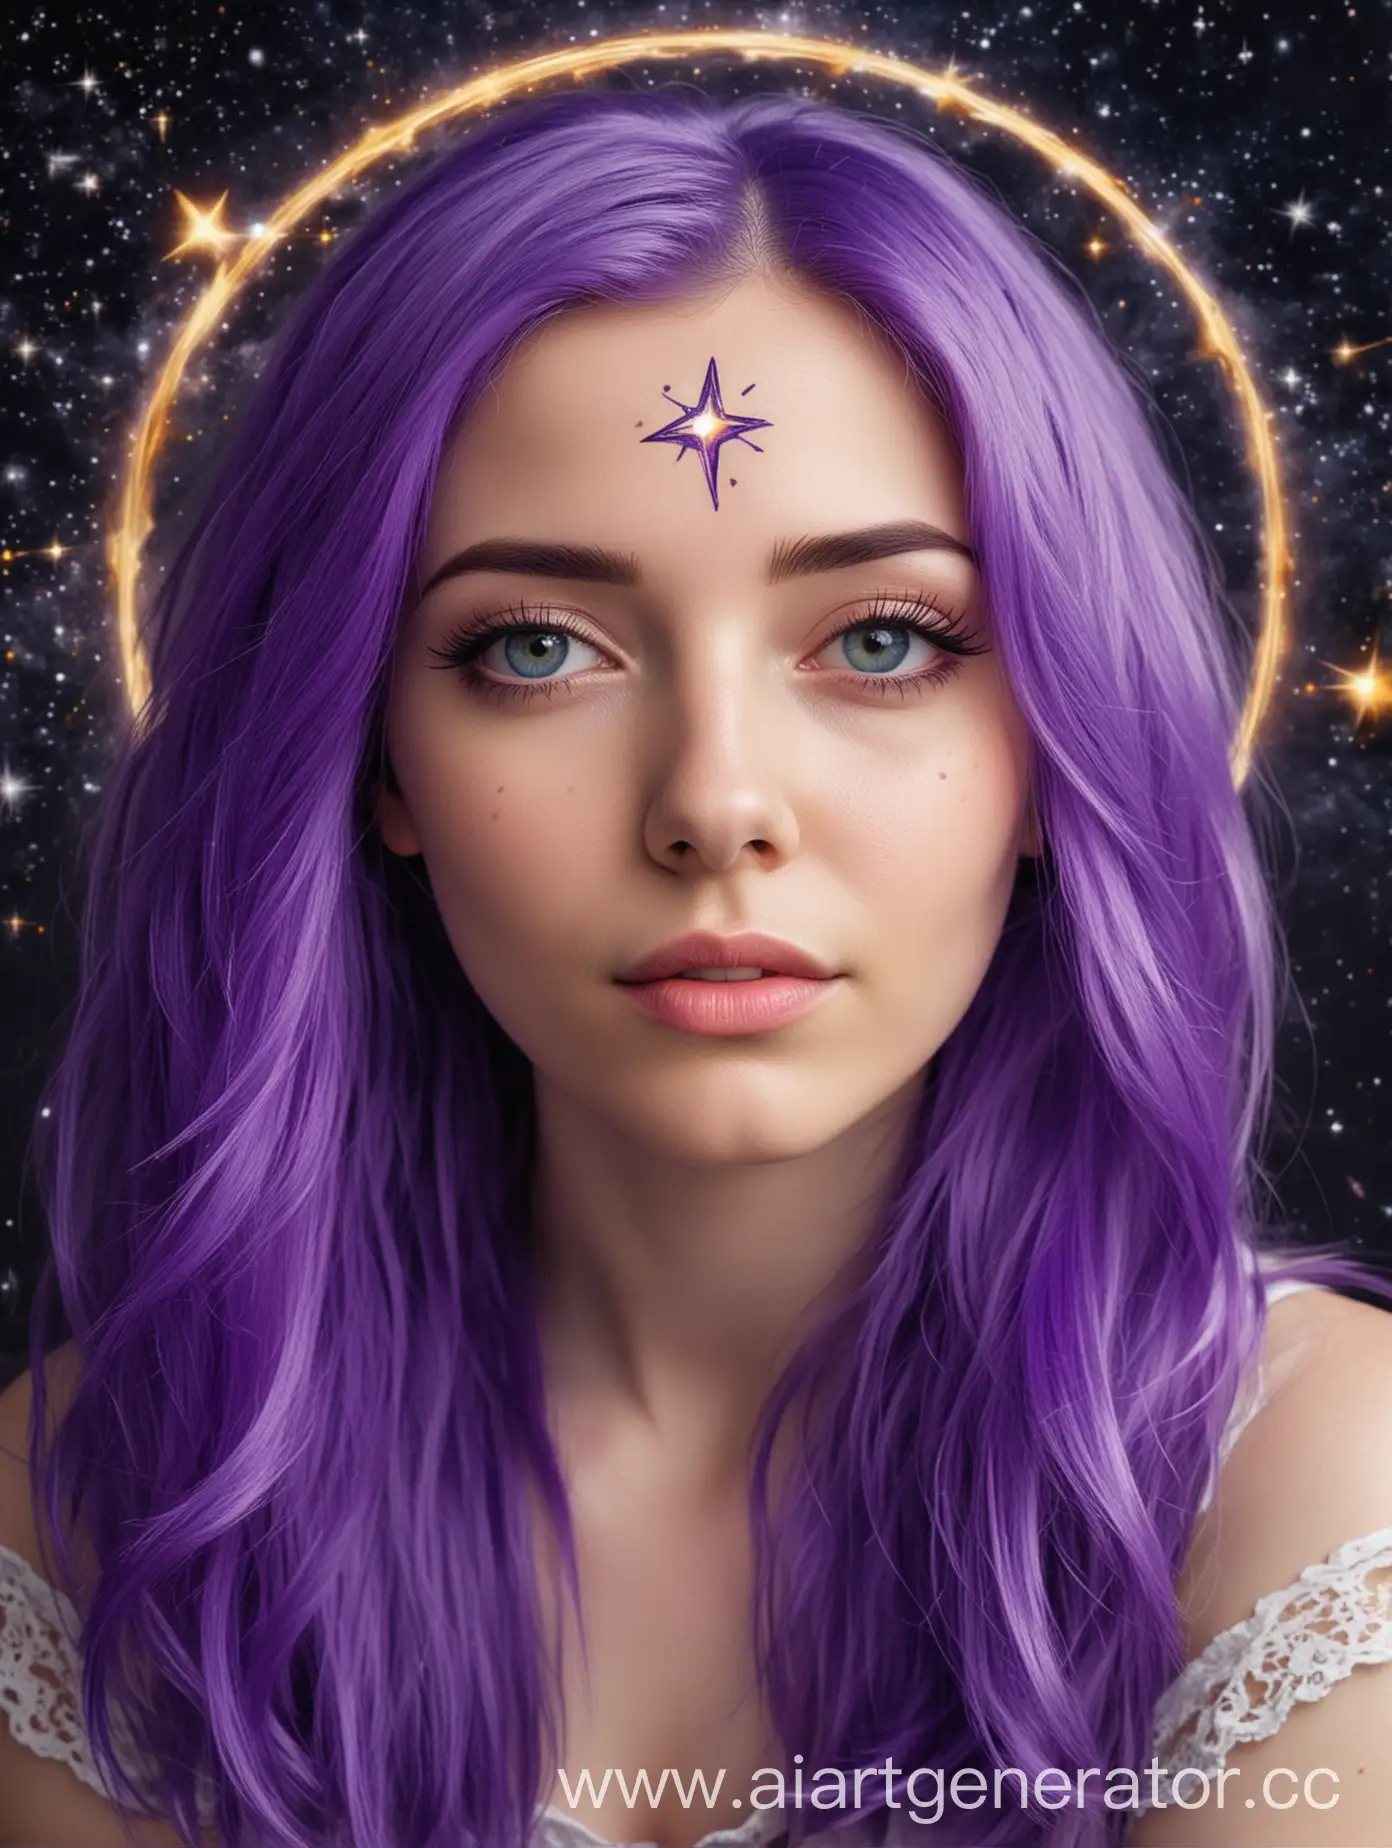 Charismatic-Girl-with-Bright-Purple-Hair-Embracing-Astrology-and-Esotericism